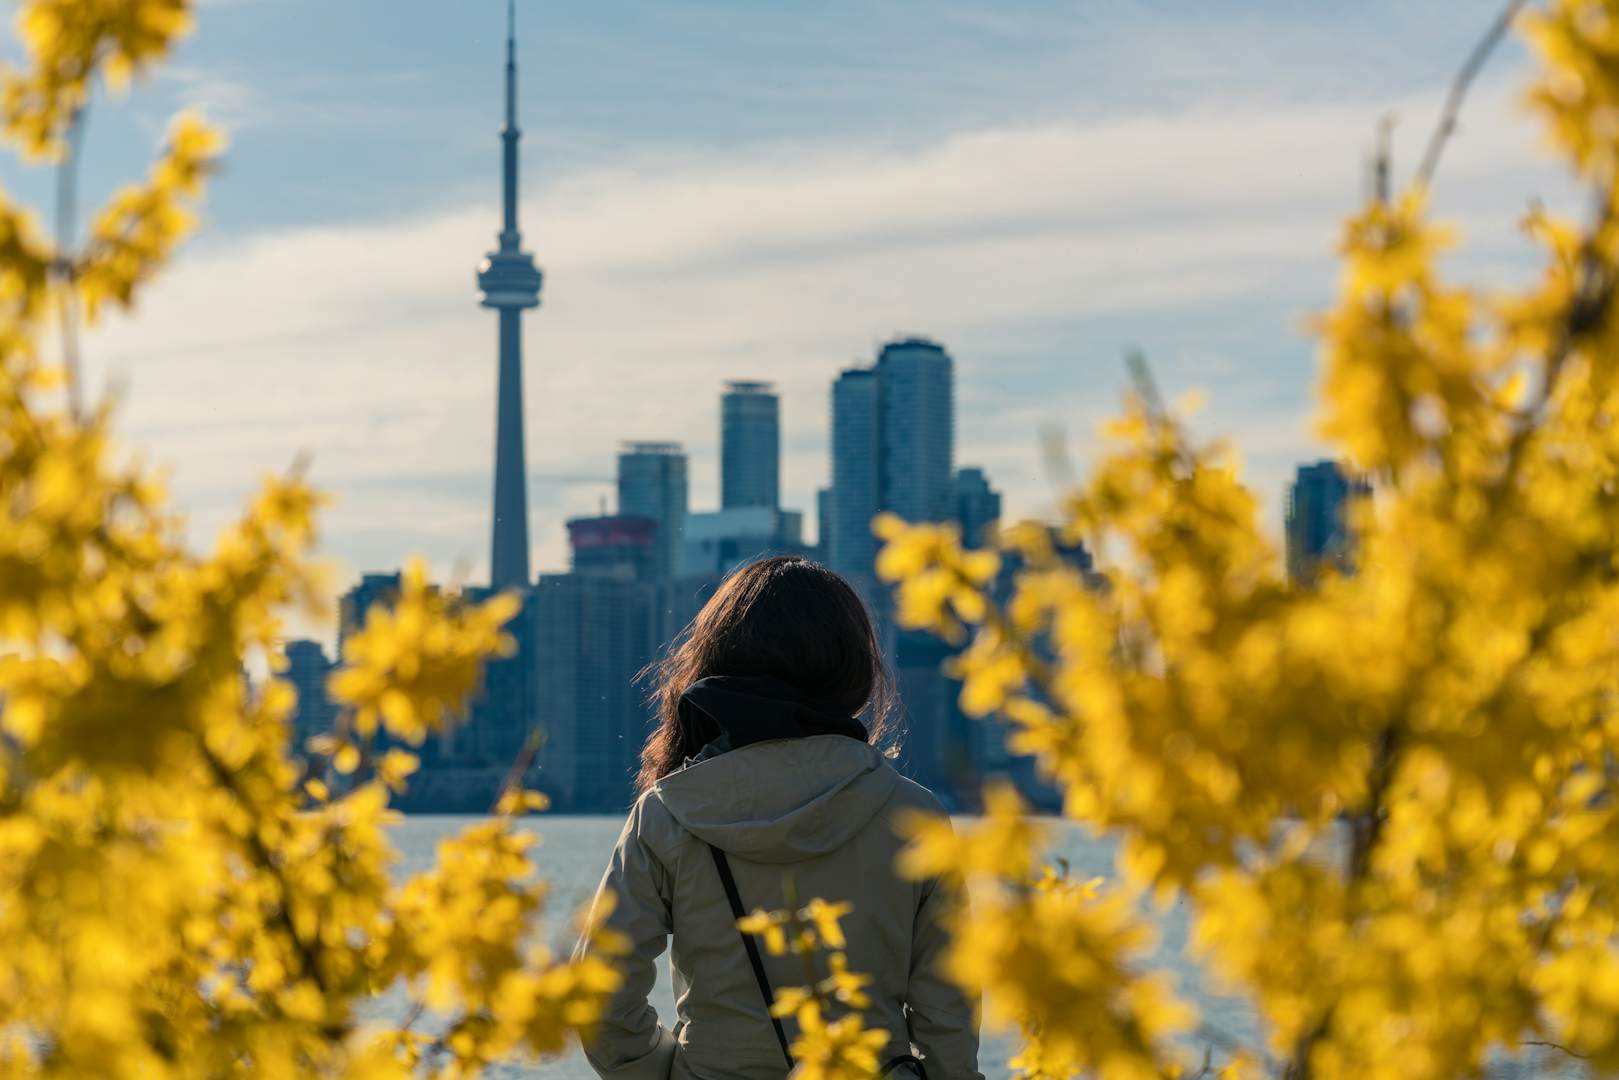 Best time to visit Toronto